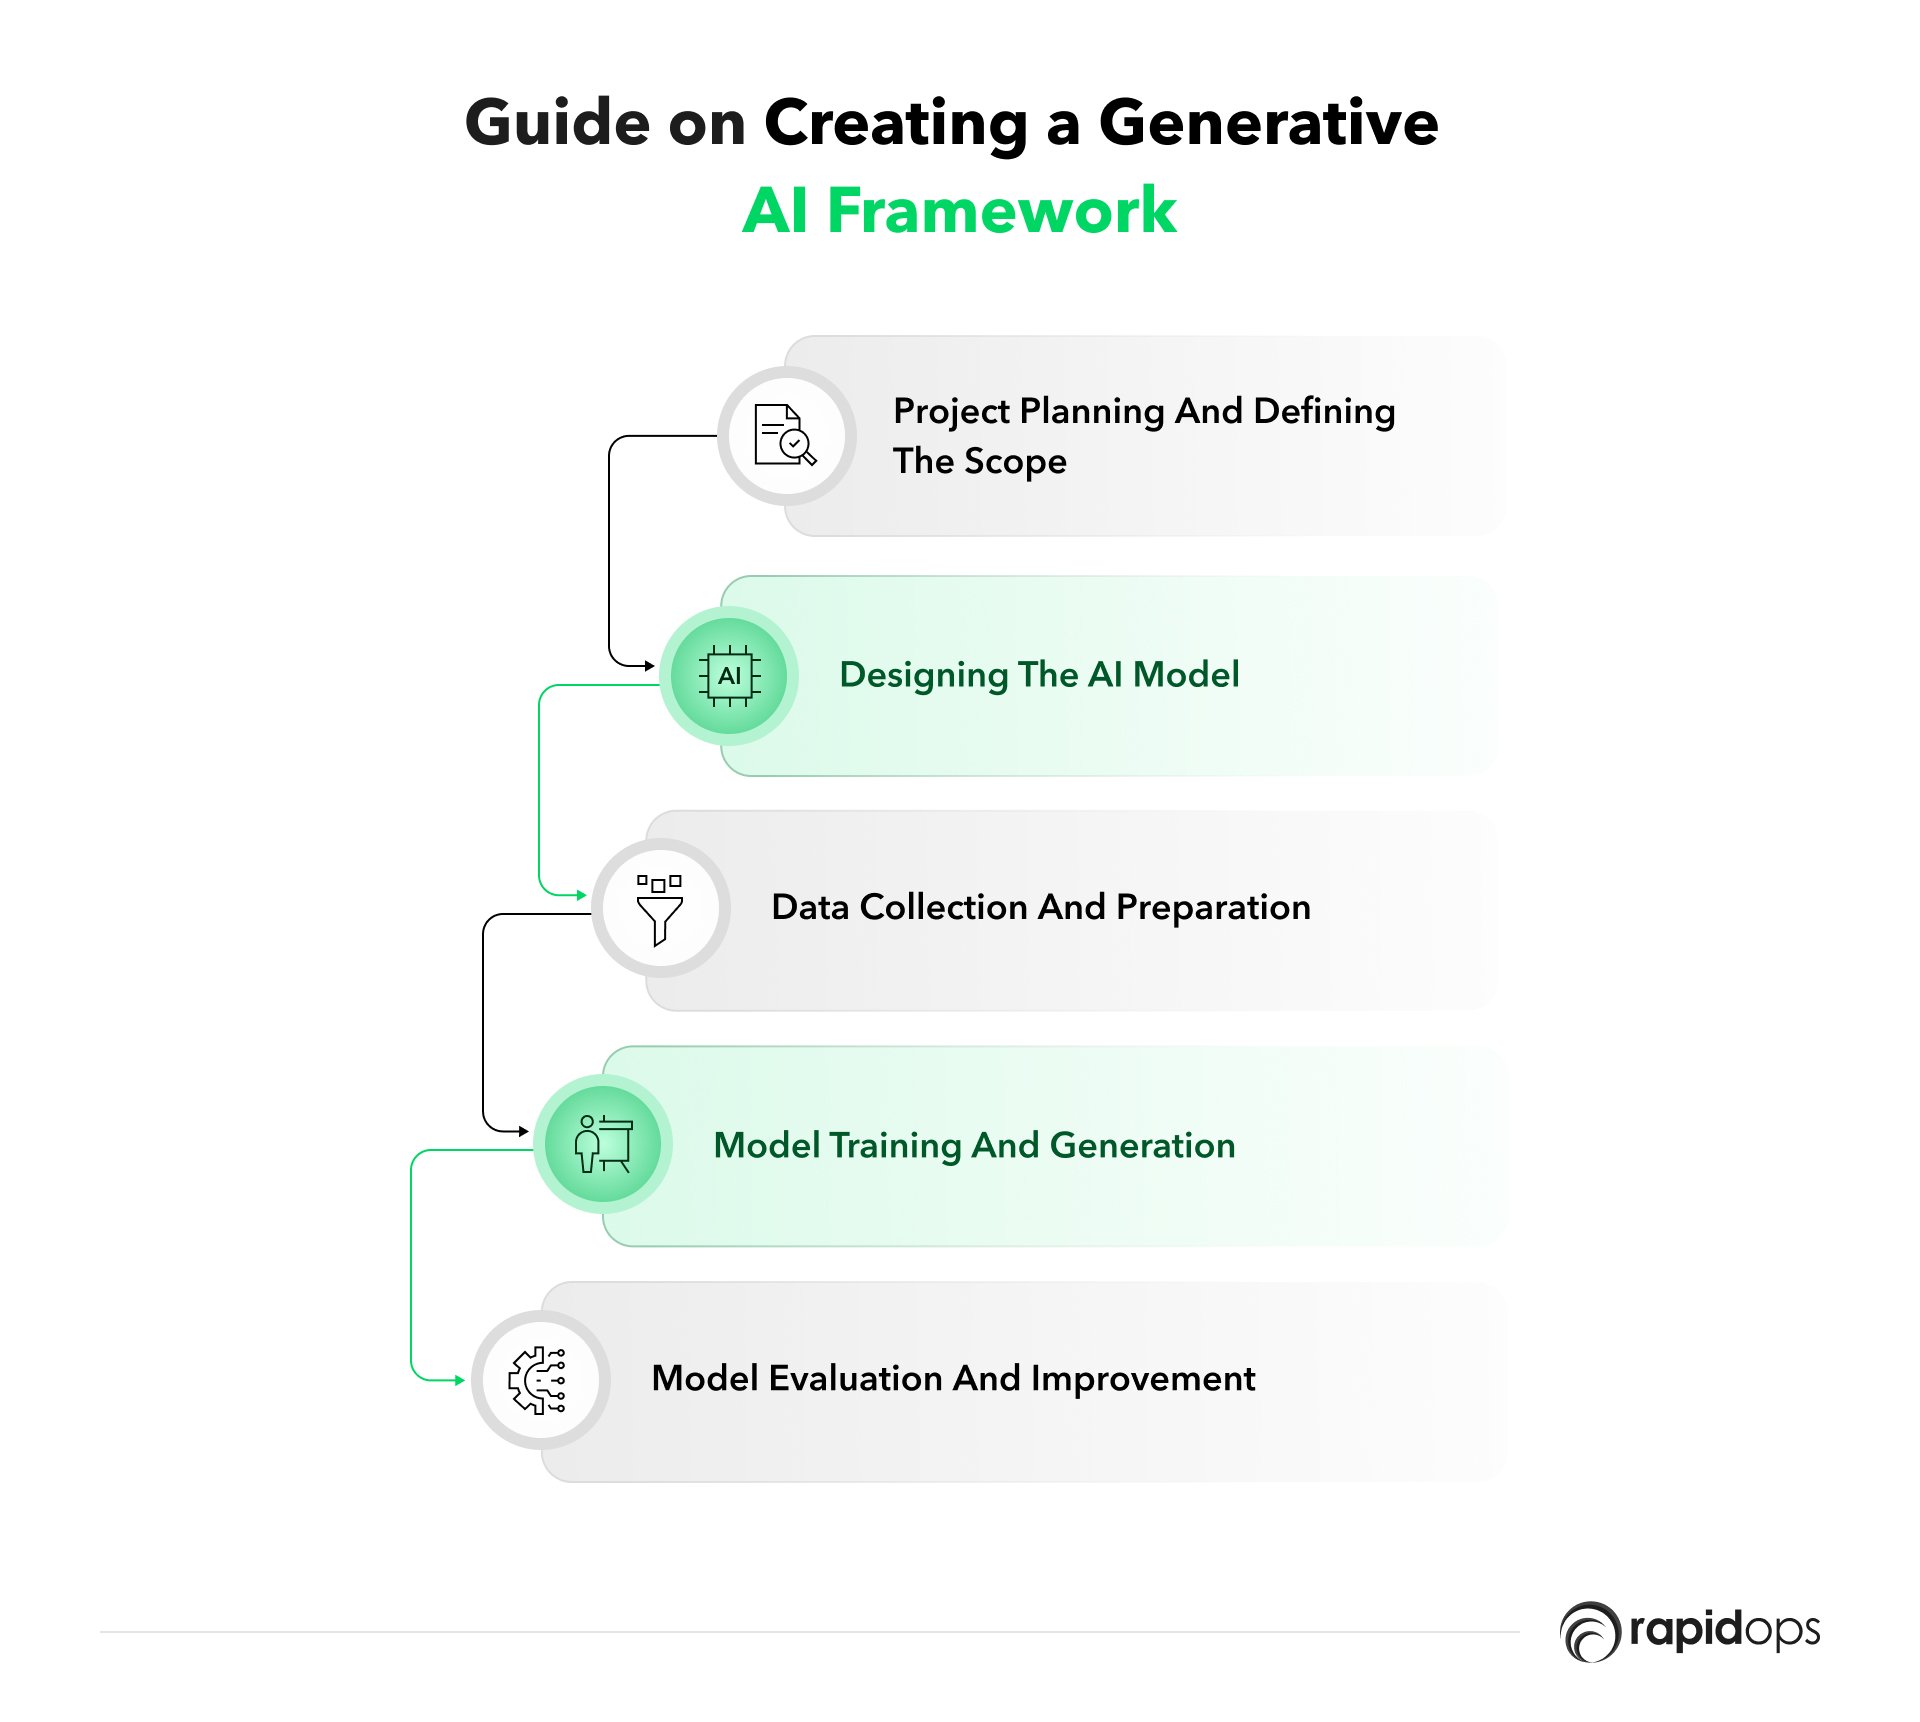 Step-by-step guide on creating a generative AI framework